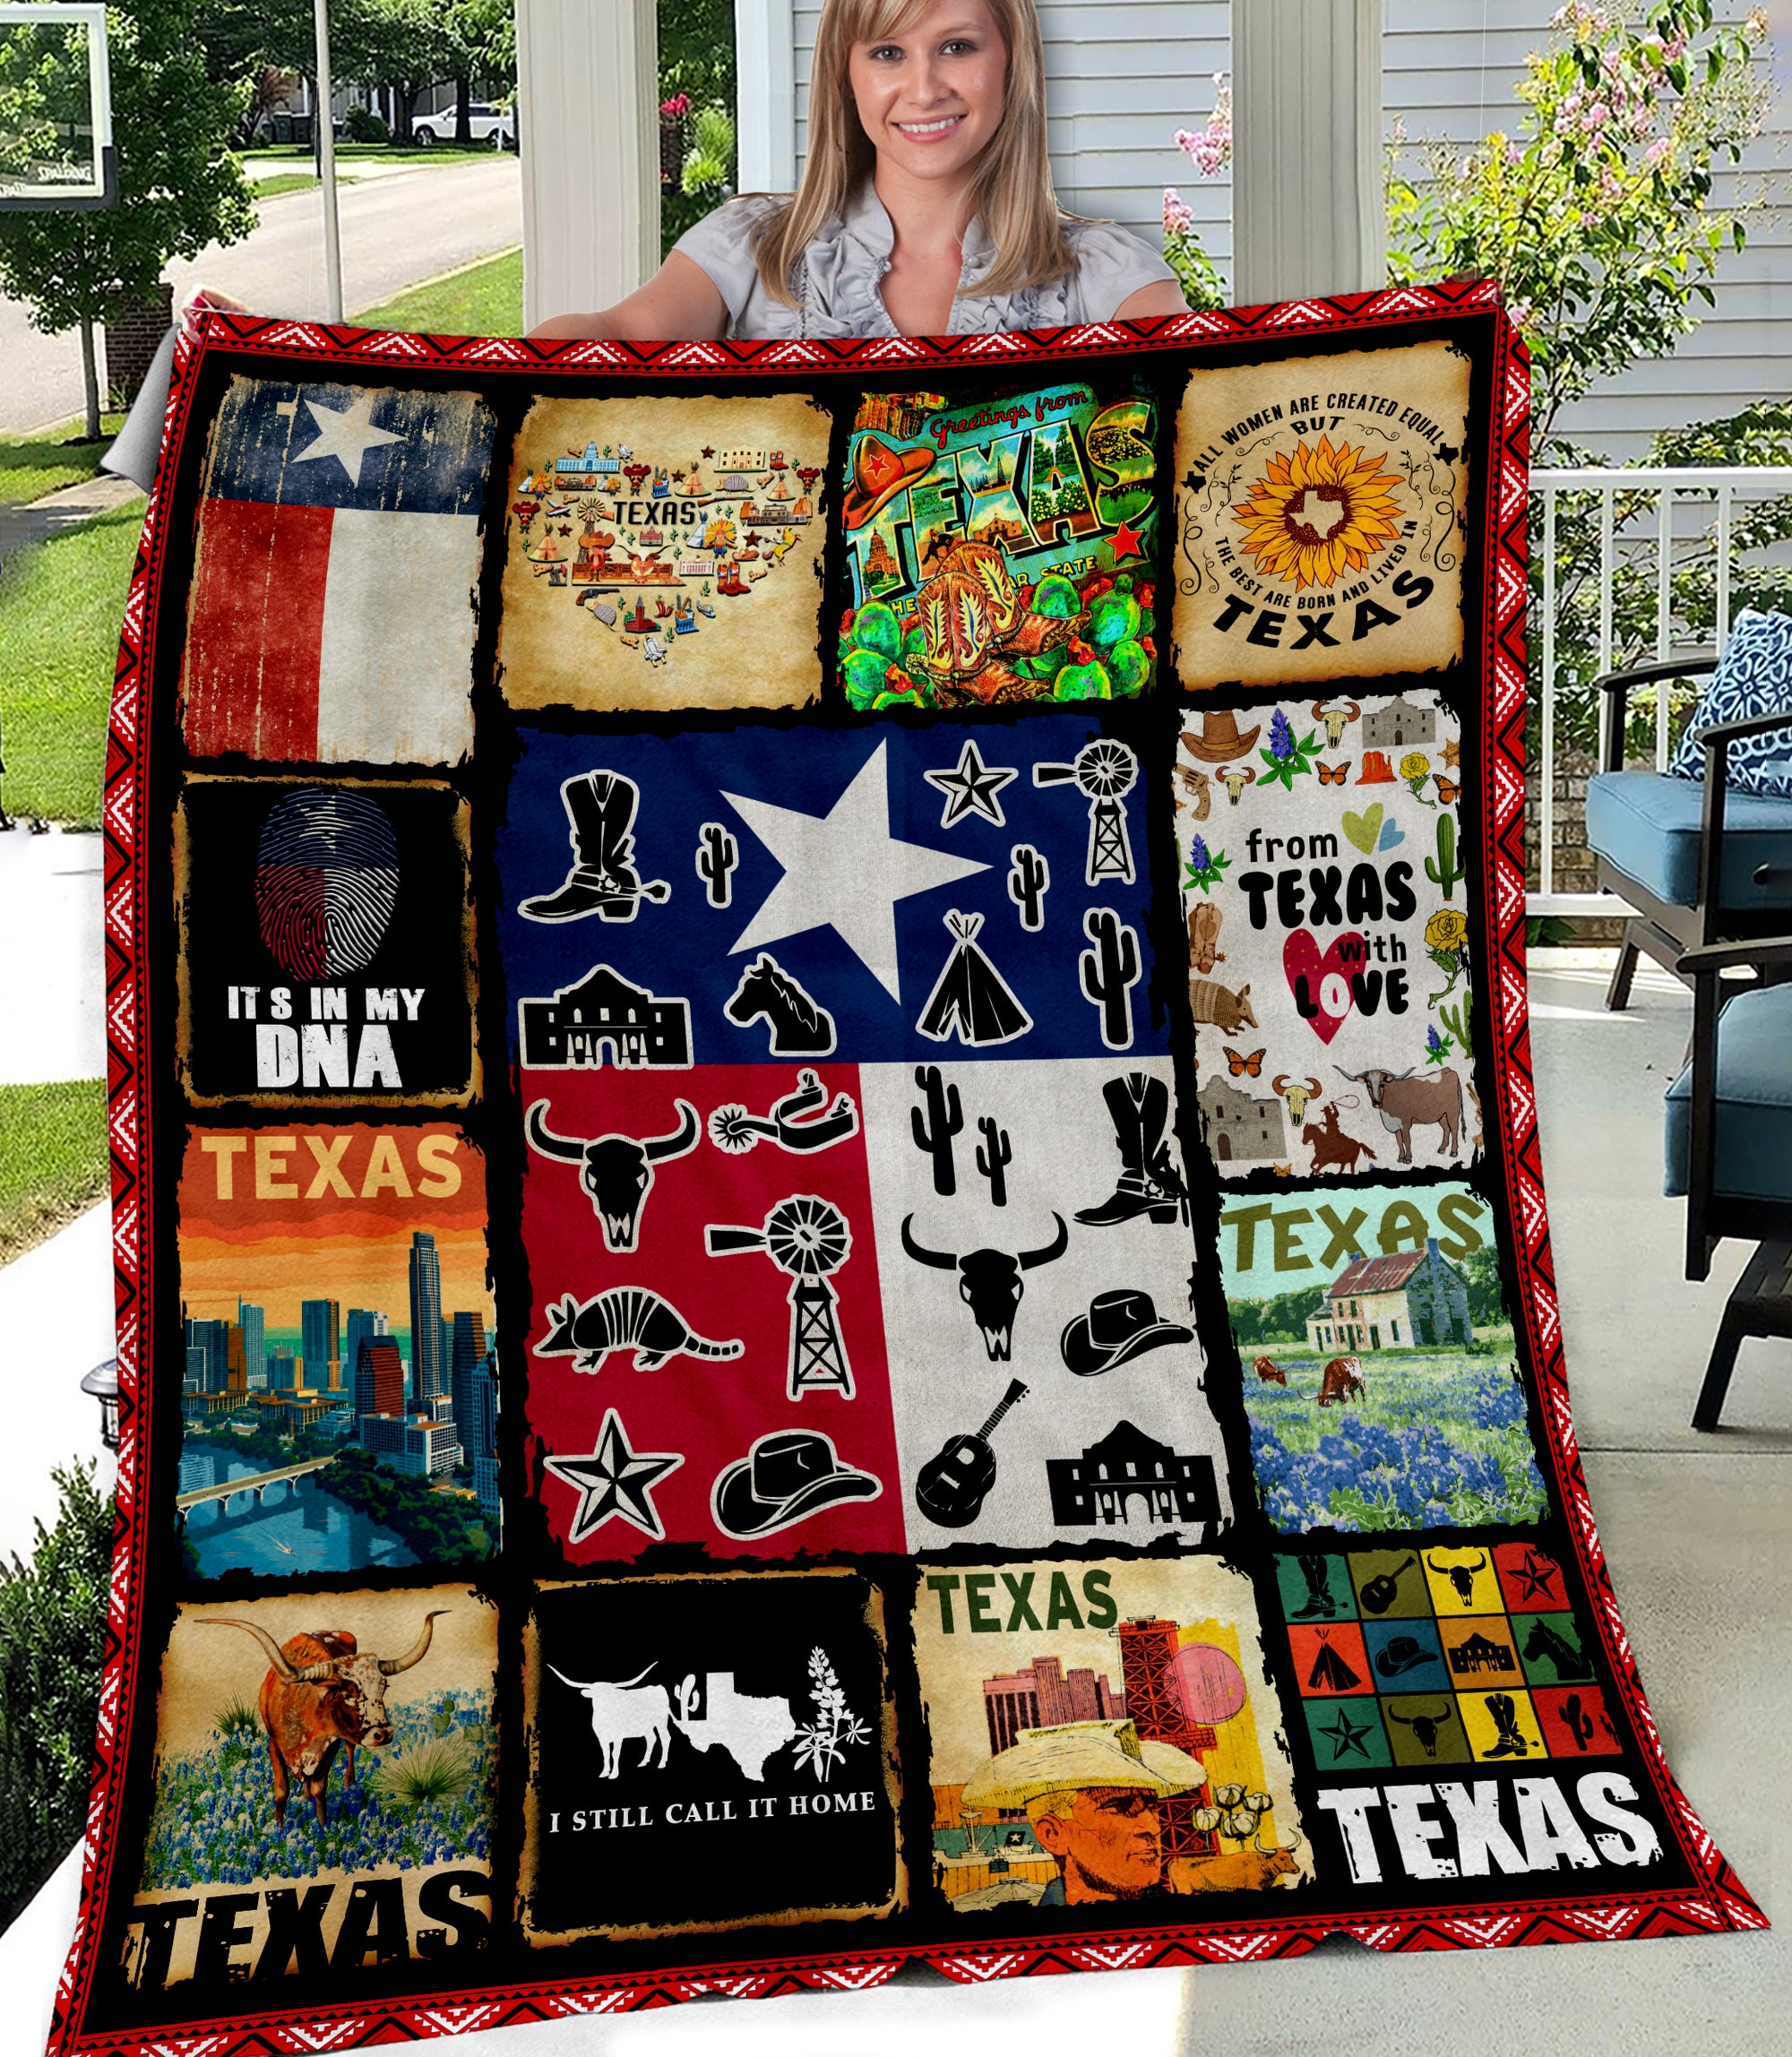 Texas Blanket With Symbols For Texas Pride